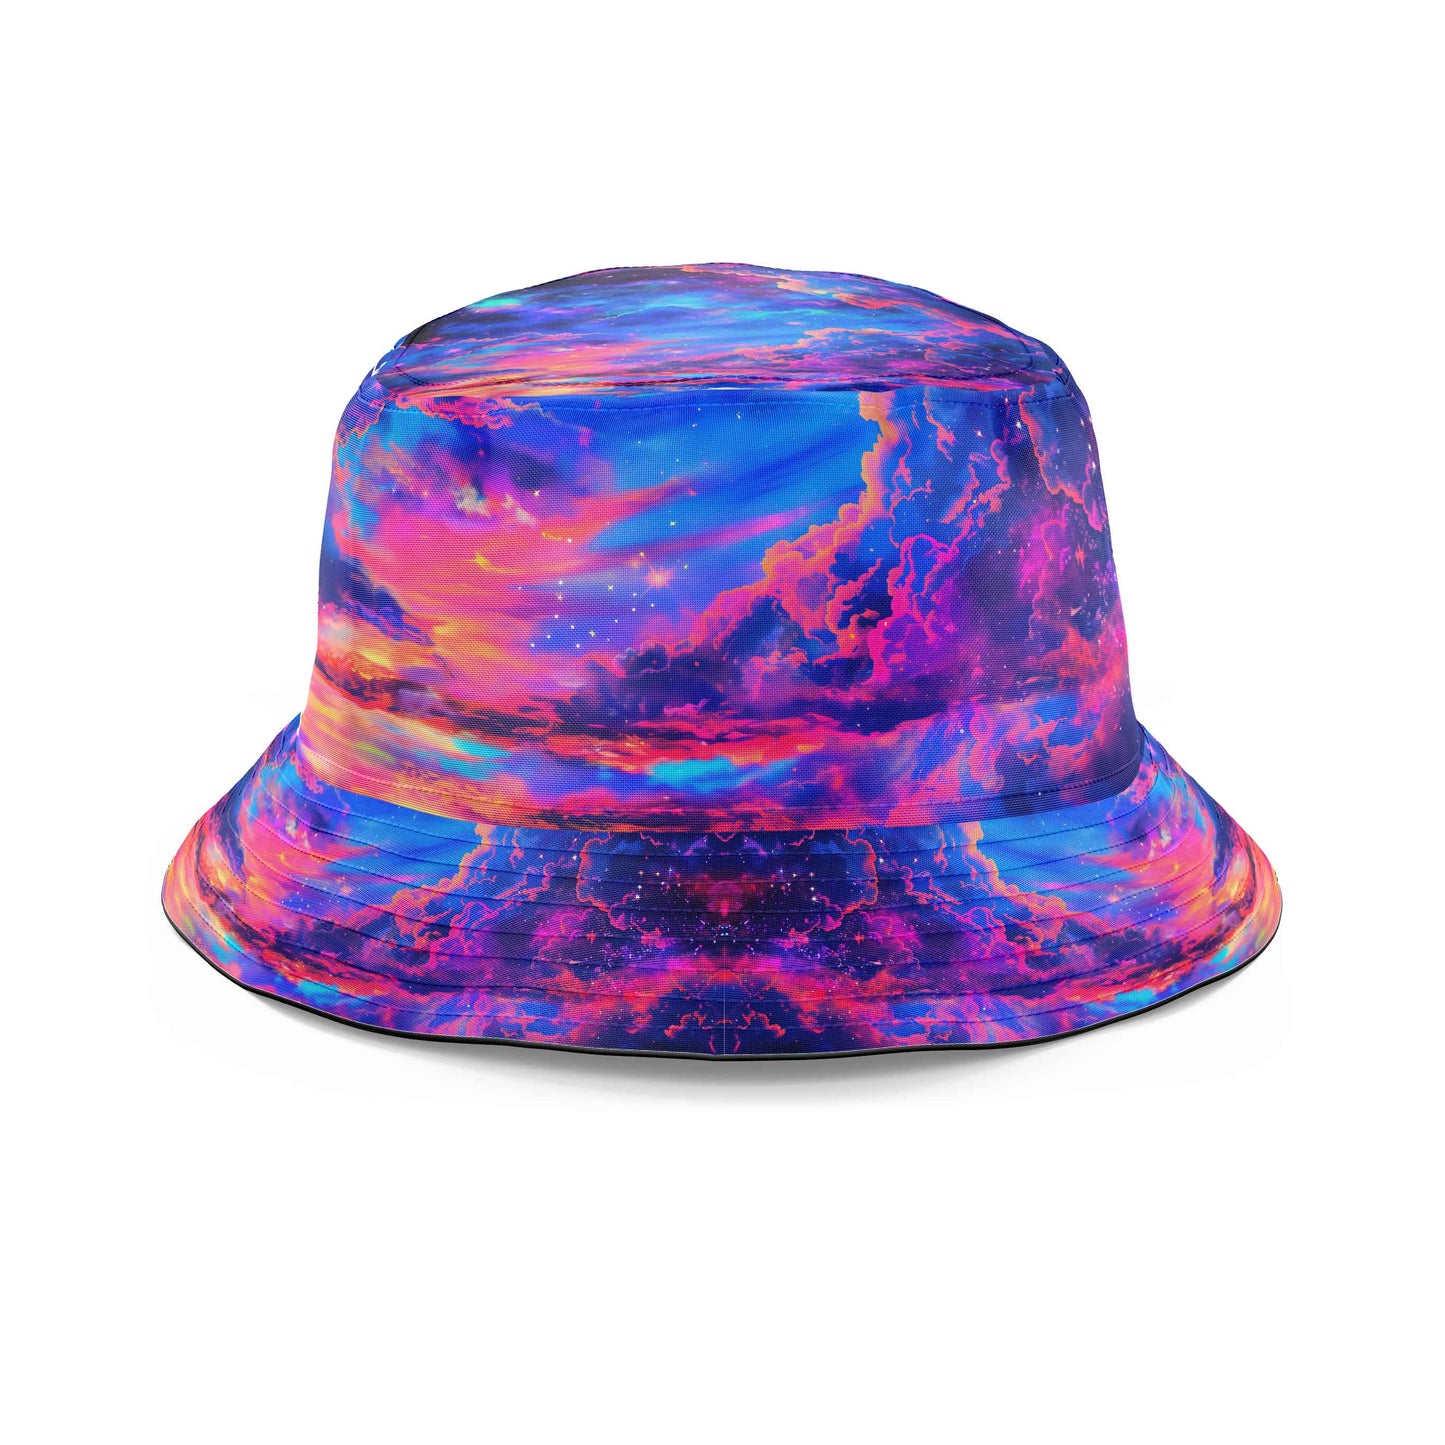 Storybook Sky Tank and Shorts with Bucket Hat Combo, iEDM, | iEDM